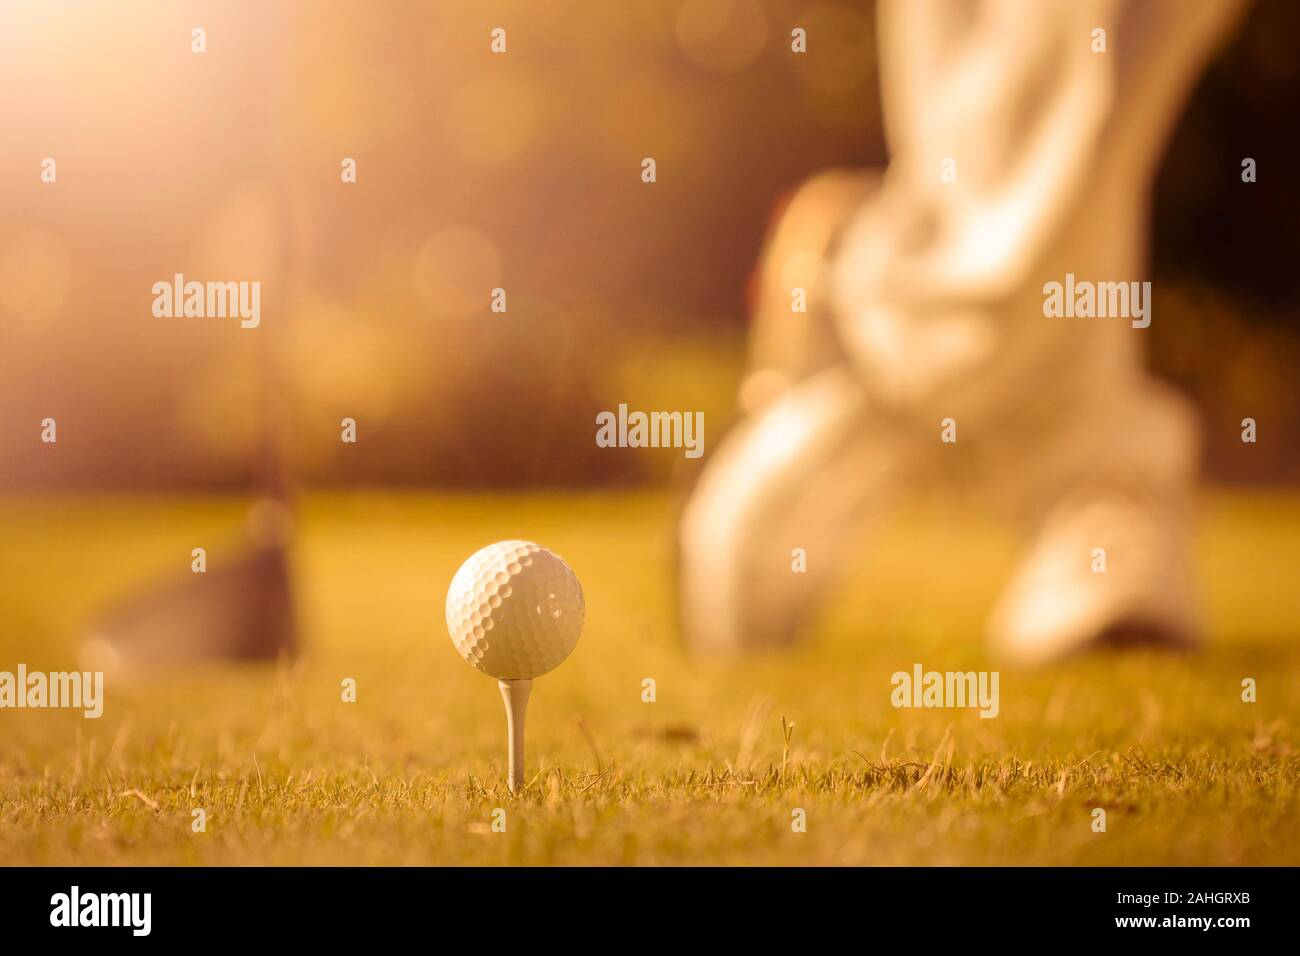 close up on golf ball on tee with golfers shoes and one wood low angle sun flare background Stock Photo